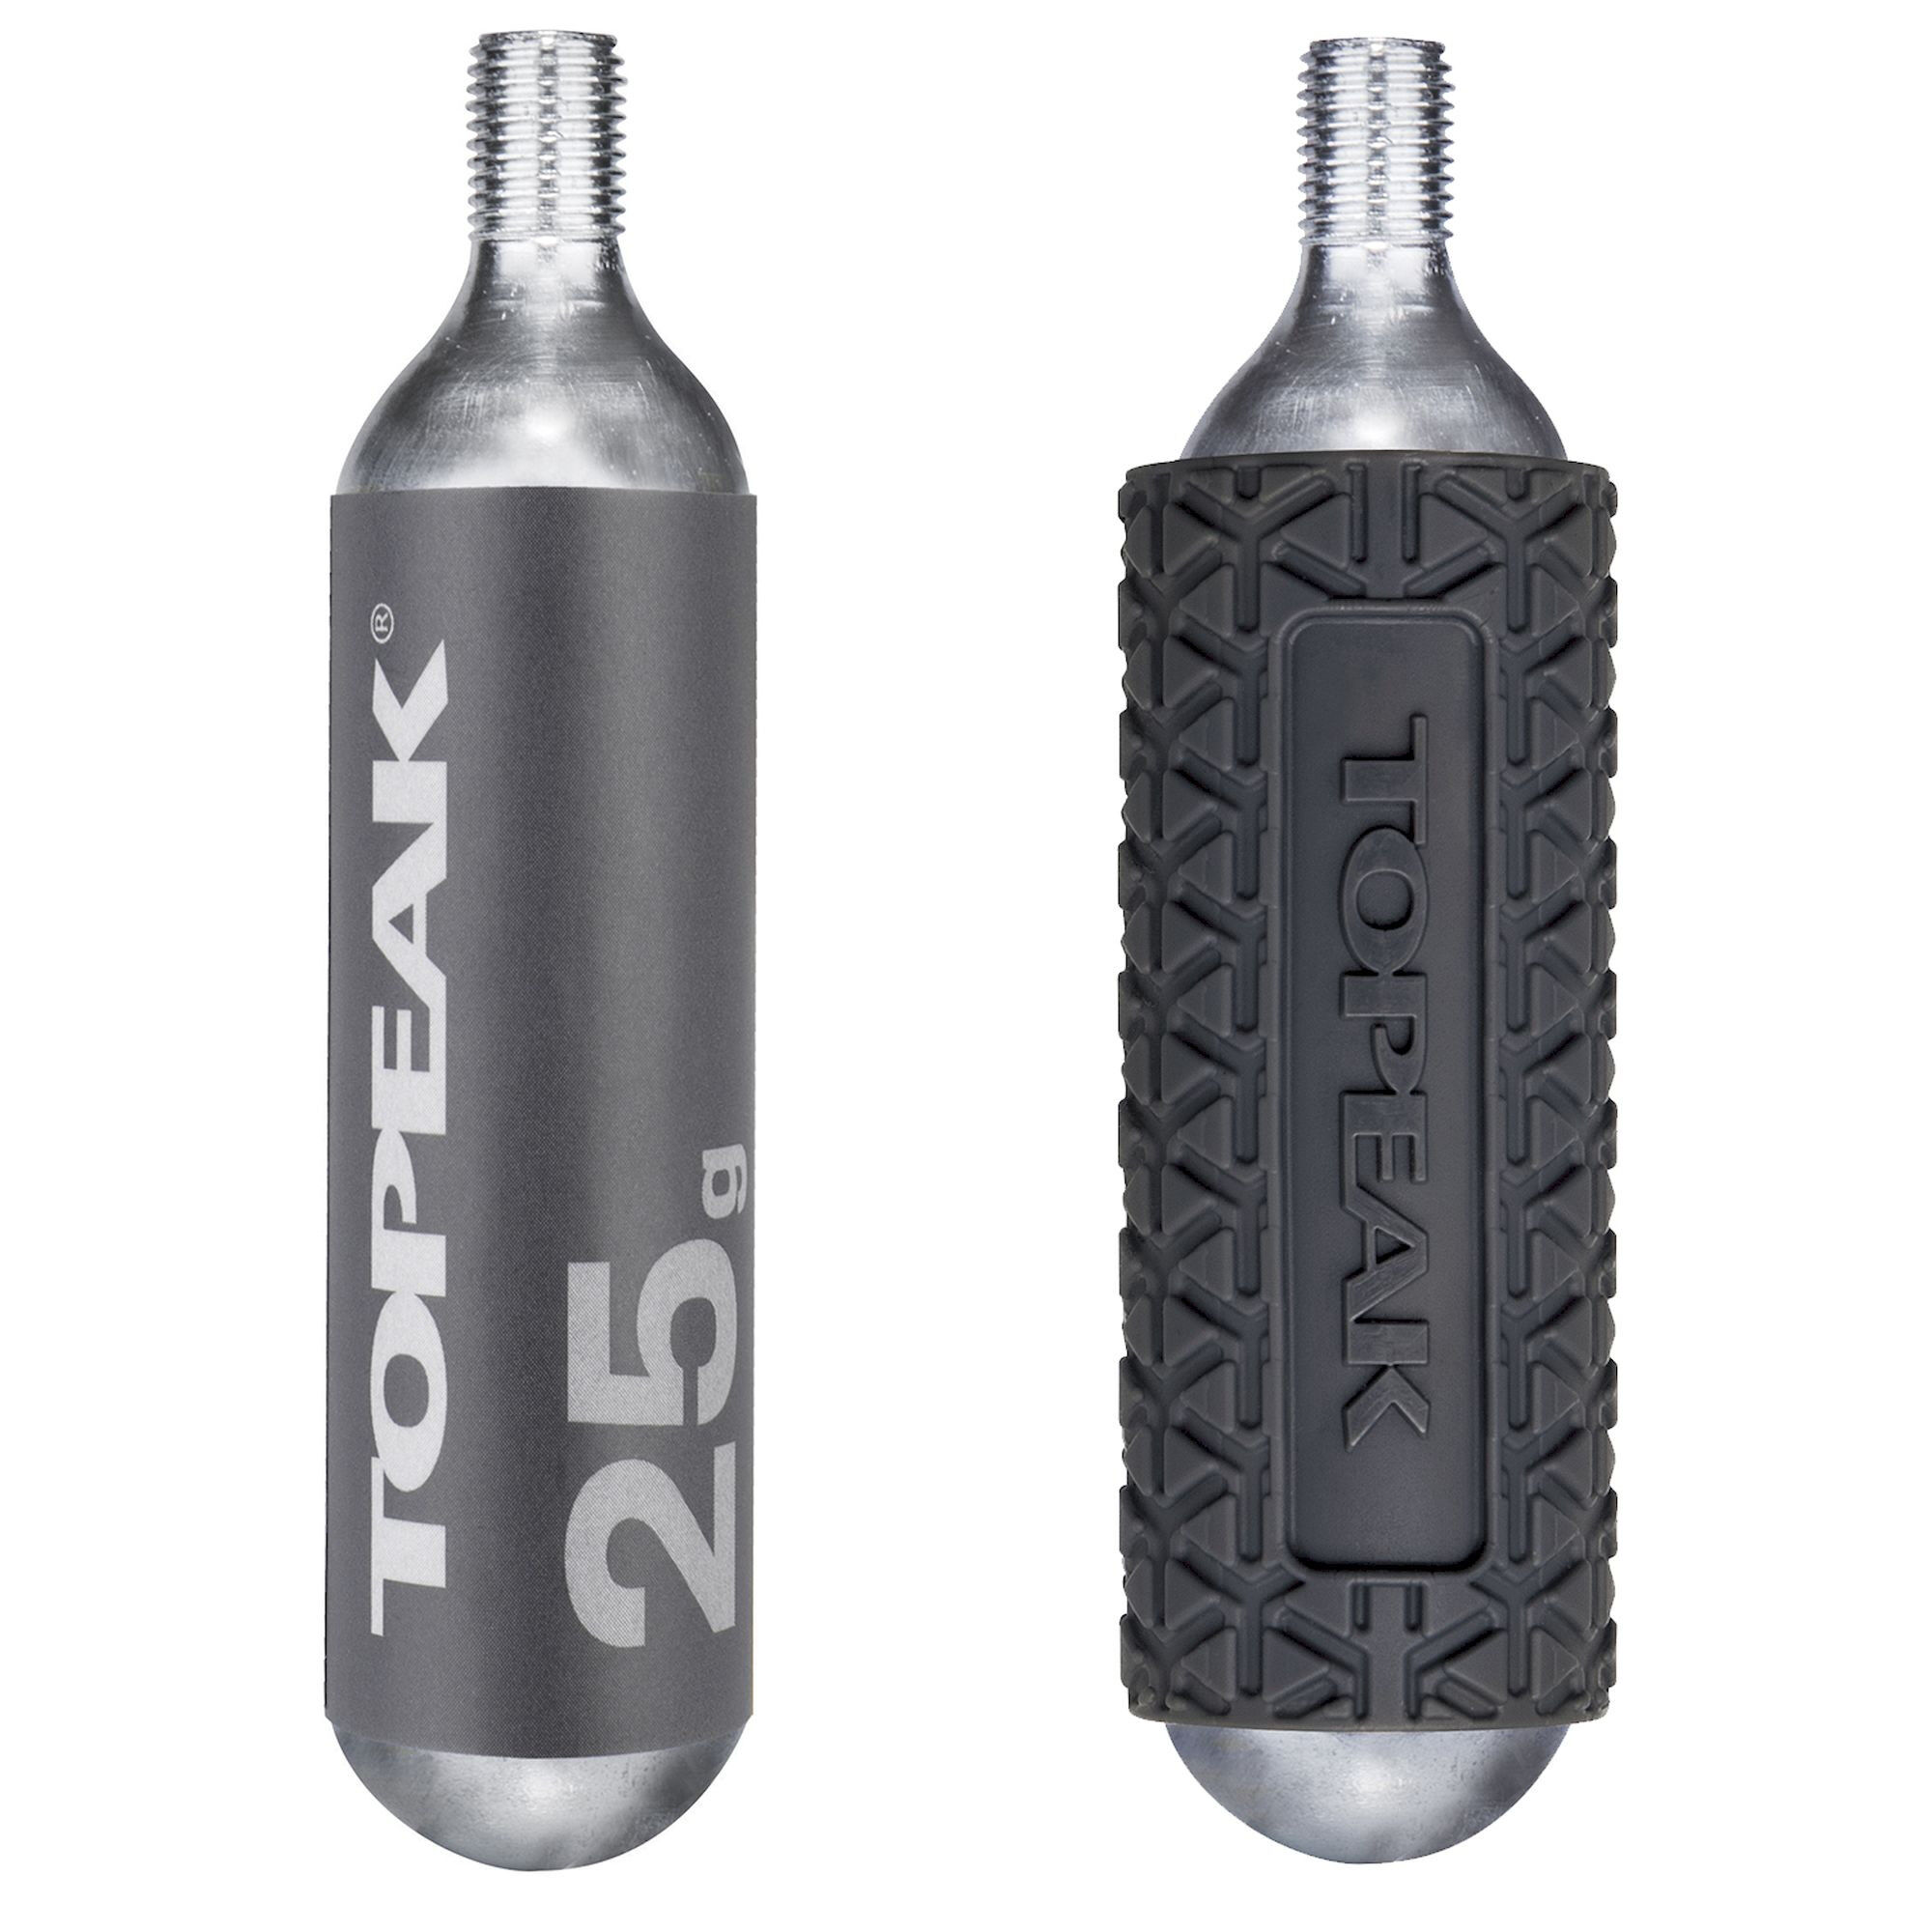 Topeak CO2 Cartridge 25g Threated (2 pieces w/ 1 cover) - CO2-pomp | Hardloop